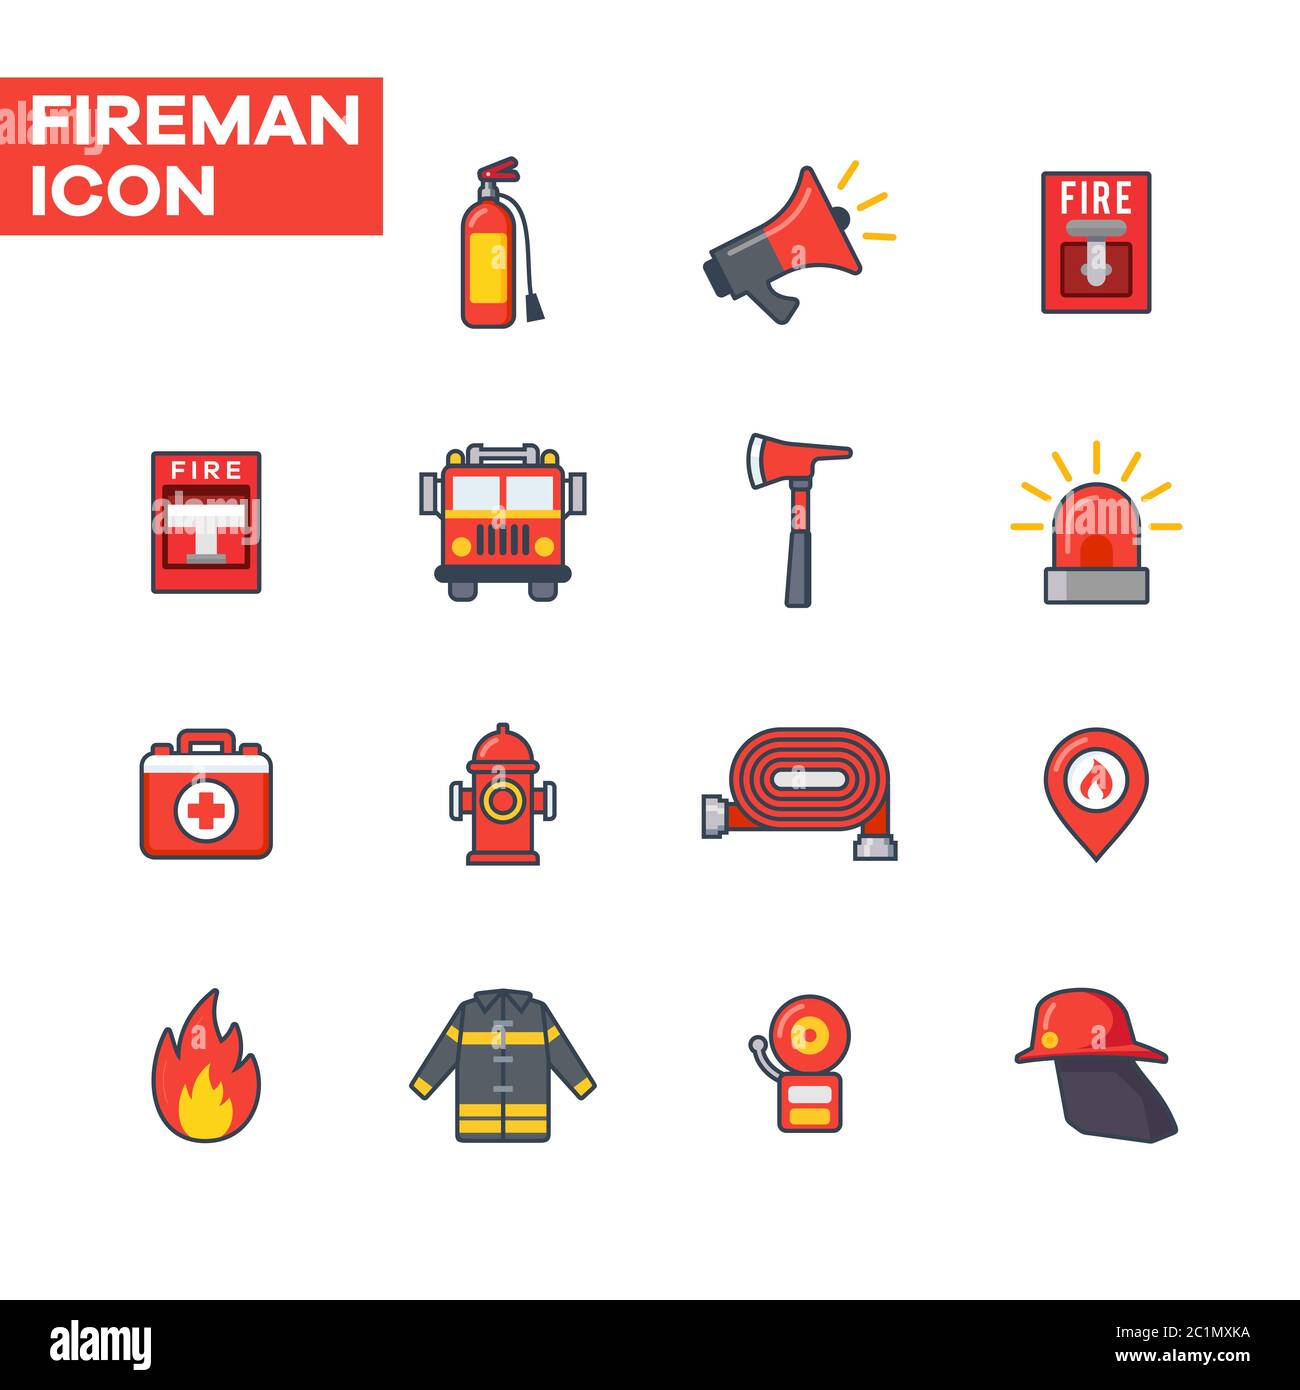 Flat icon of fire extinguisher, alarm and fire fighting equipment. Fireman icon set with bold lines. Fire fighter graphic resources. Stock Vector